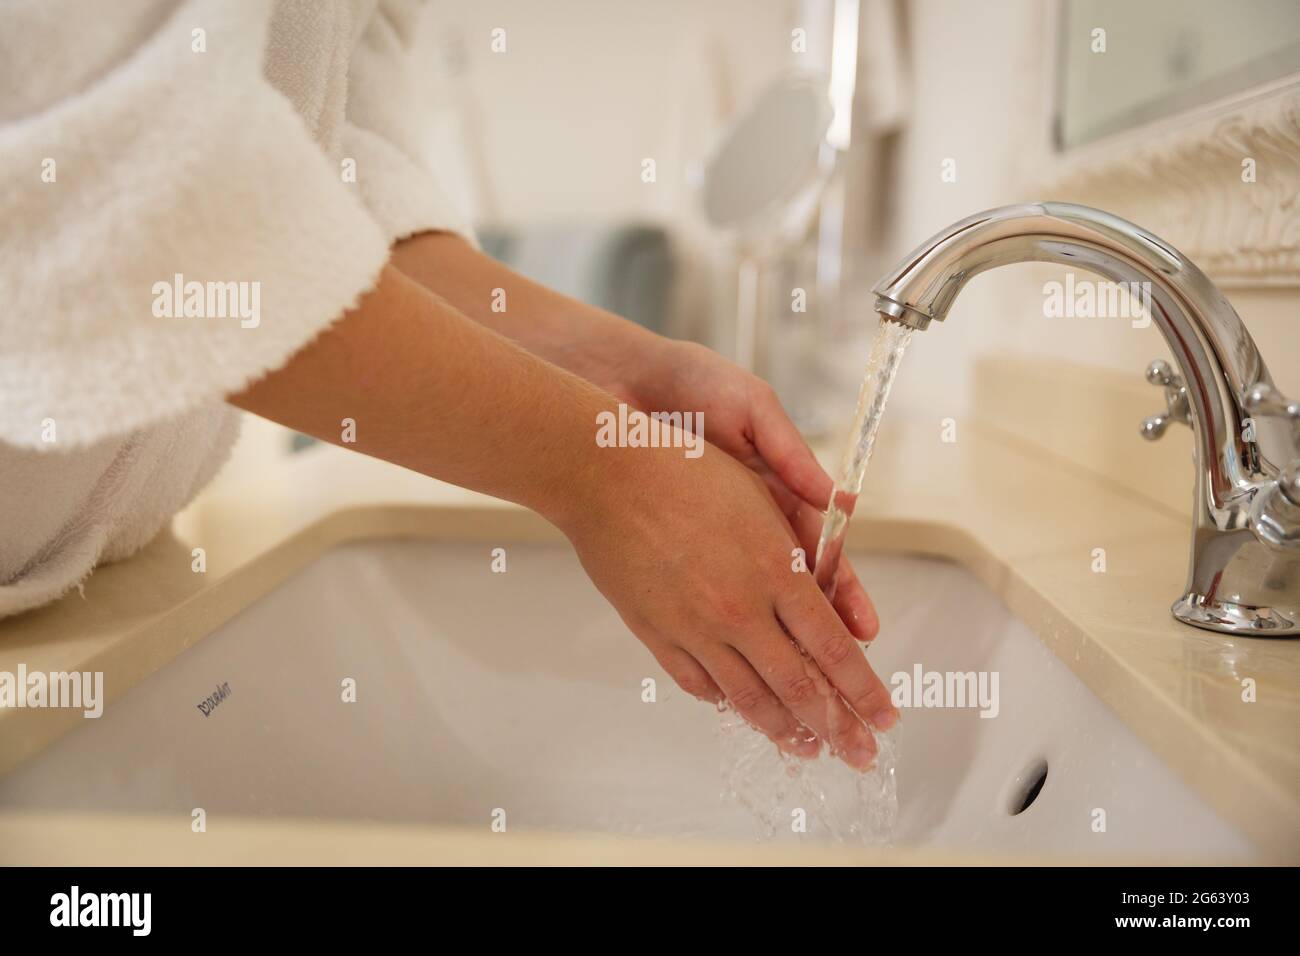 Midsection of caucasian woman in bathroom wearing bathrobe washing hands in basin Stock Photo